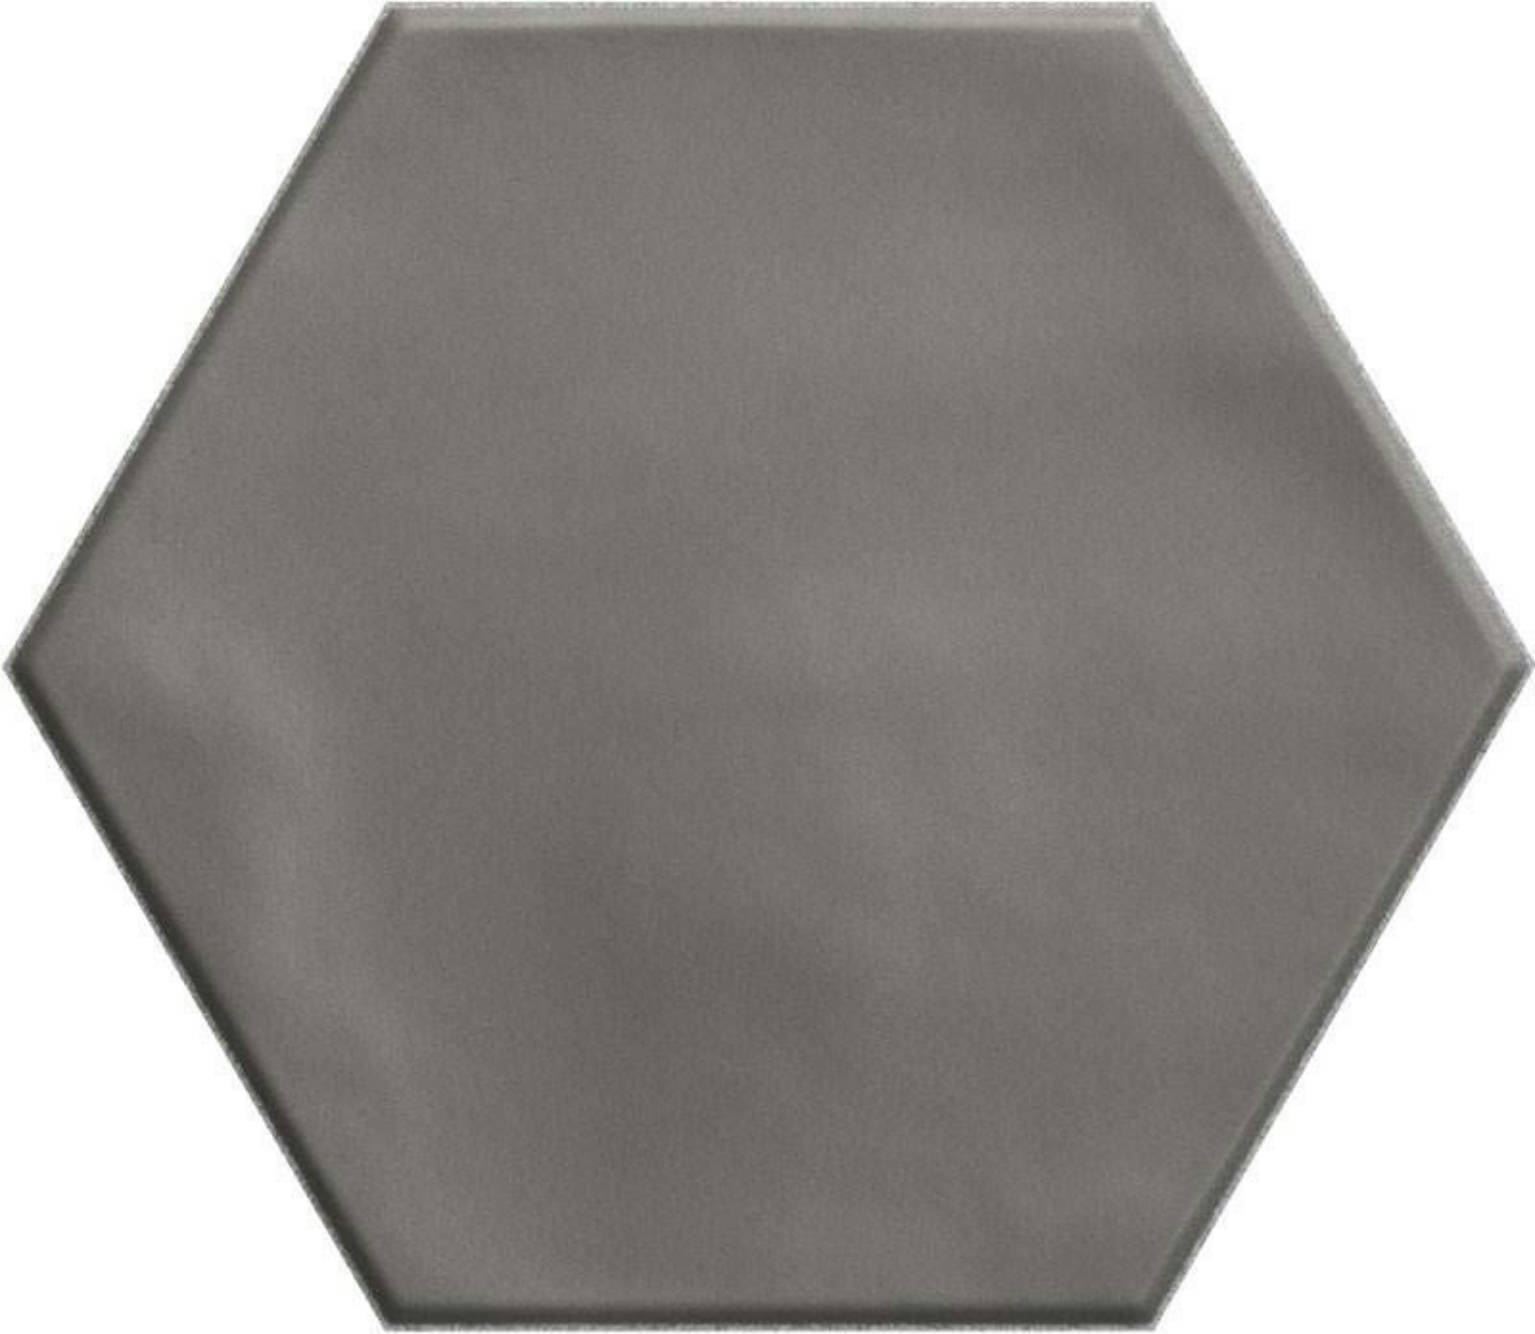 Geometry Hex Grey Matte | Stones & More | Finest selection of Mosaics, Glass, Tile and Stone